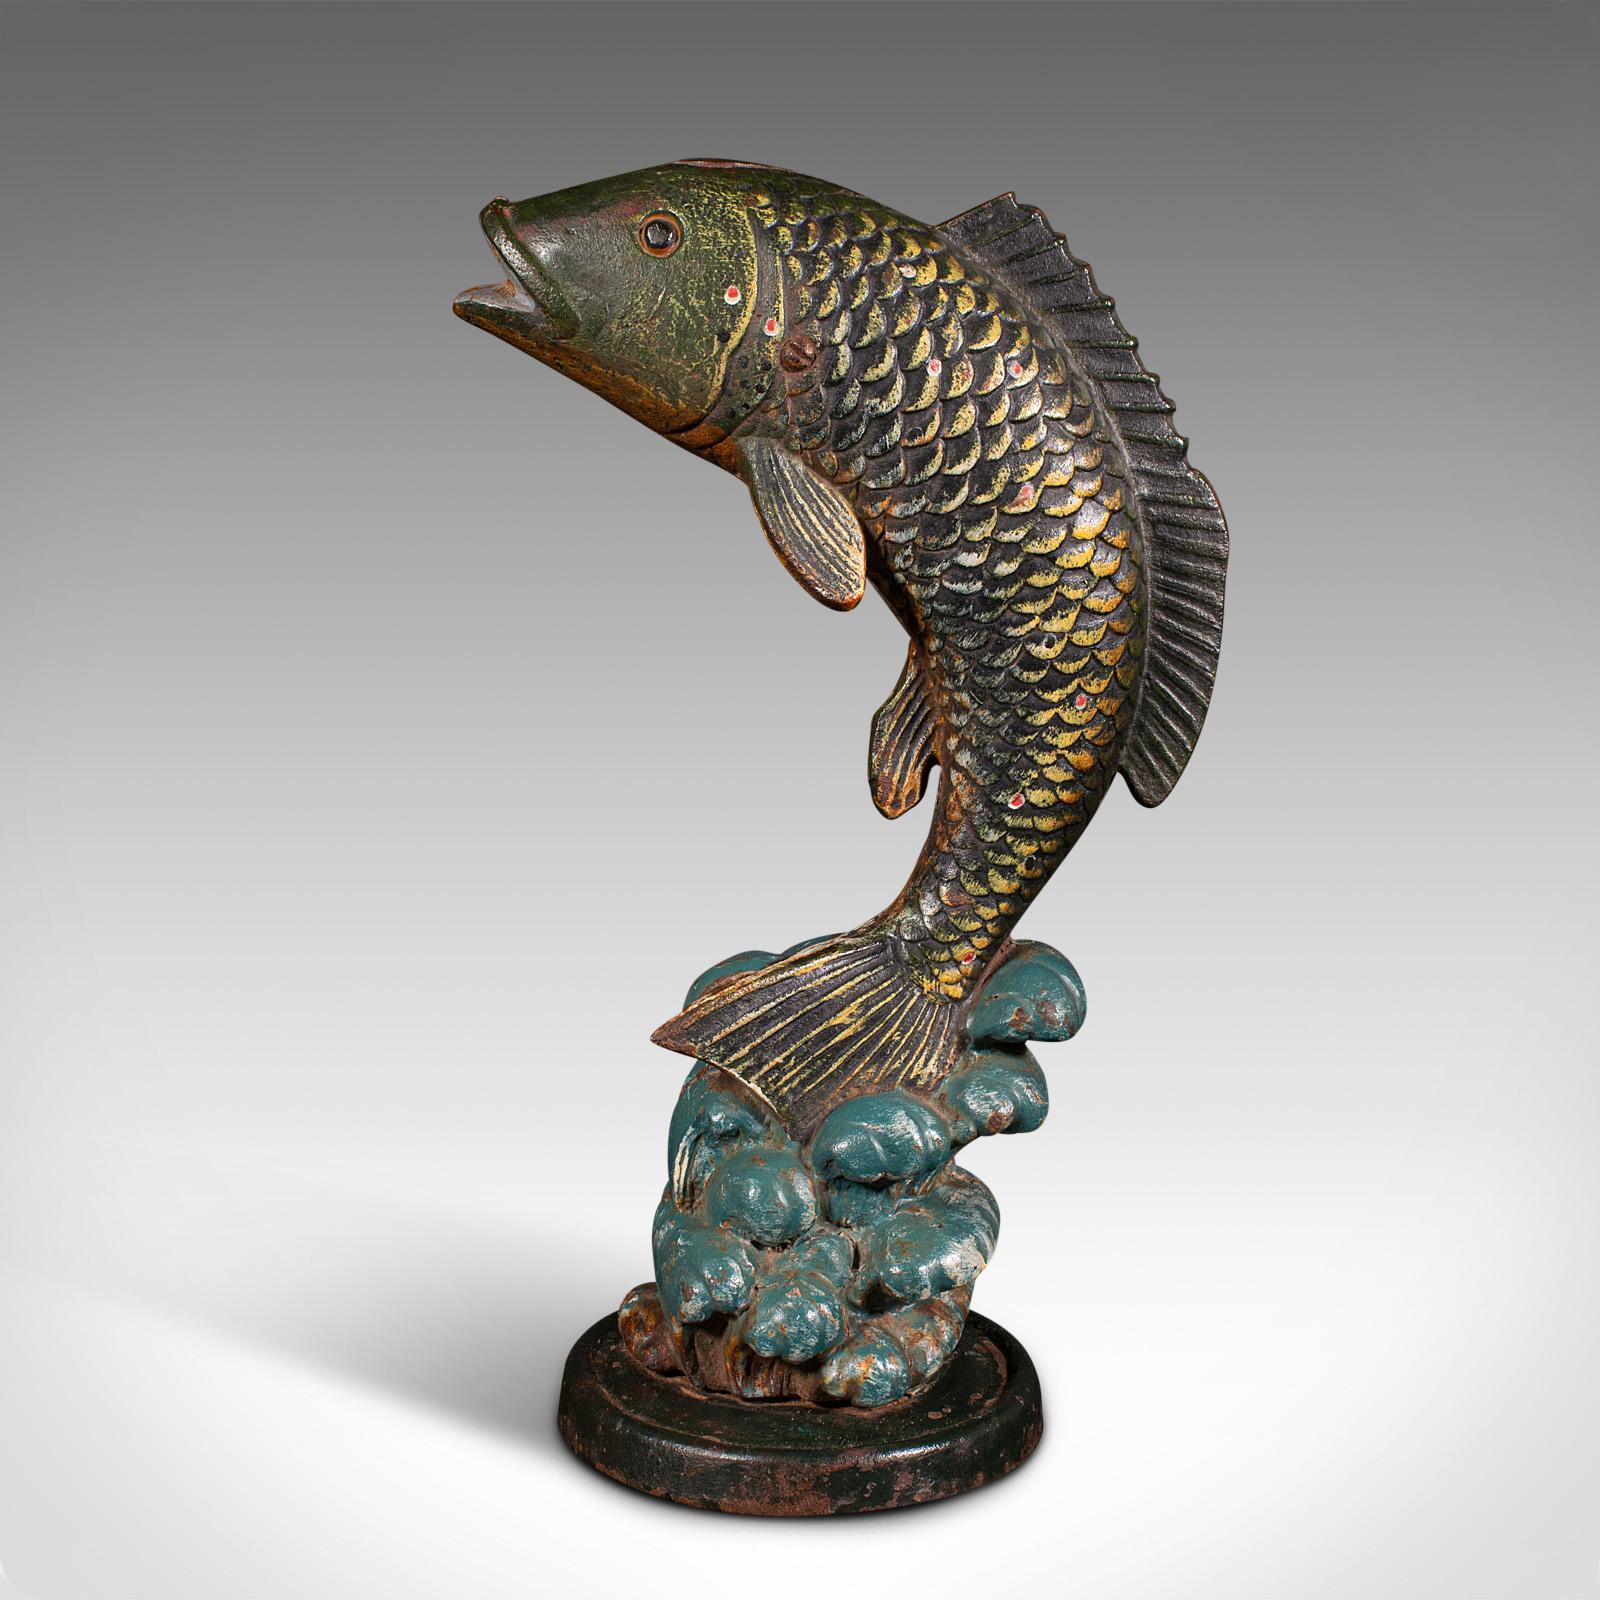 This is an antique fish statue. An English, cast iron angler's doorstop, dating to the late Victorian period, circa 1900.

Striking leaping carp figure with great colour
Displays a desirable aged patina and in good order
Hand-painted cast iron